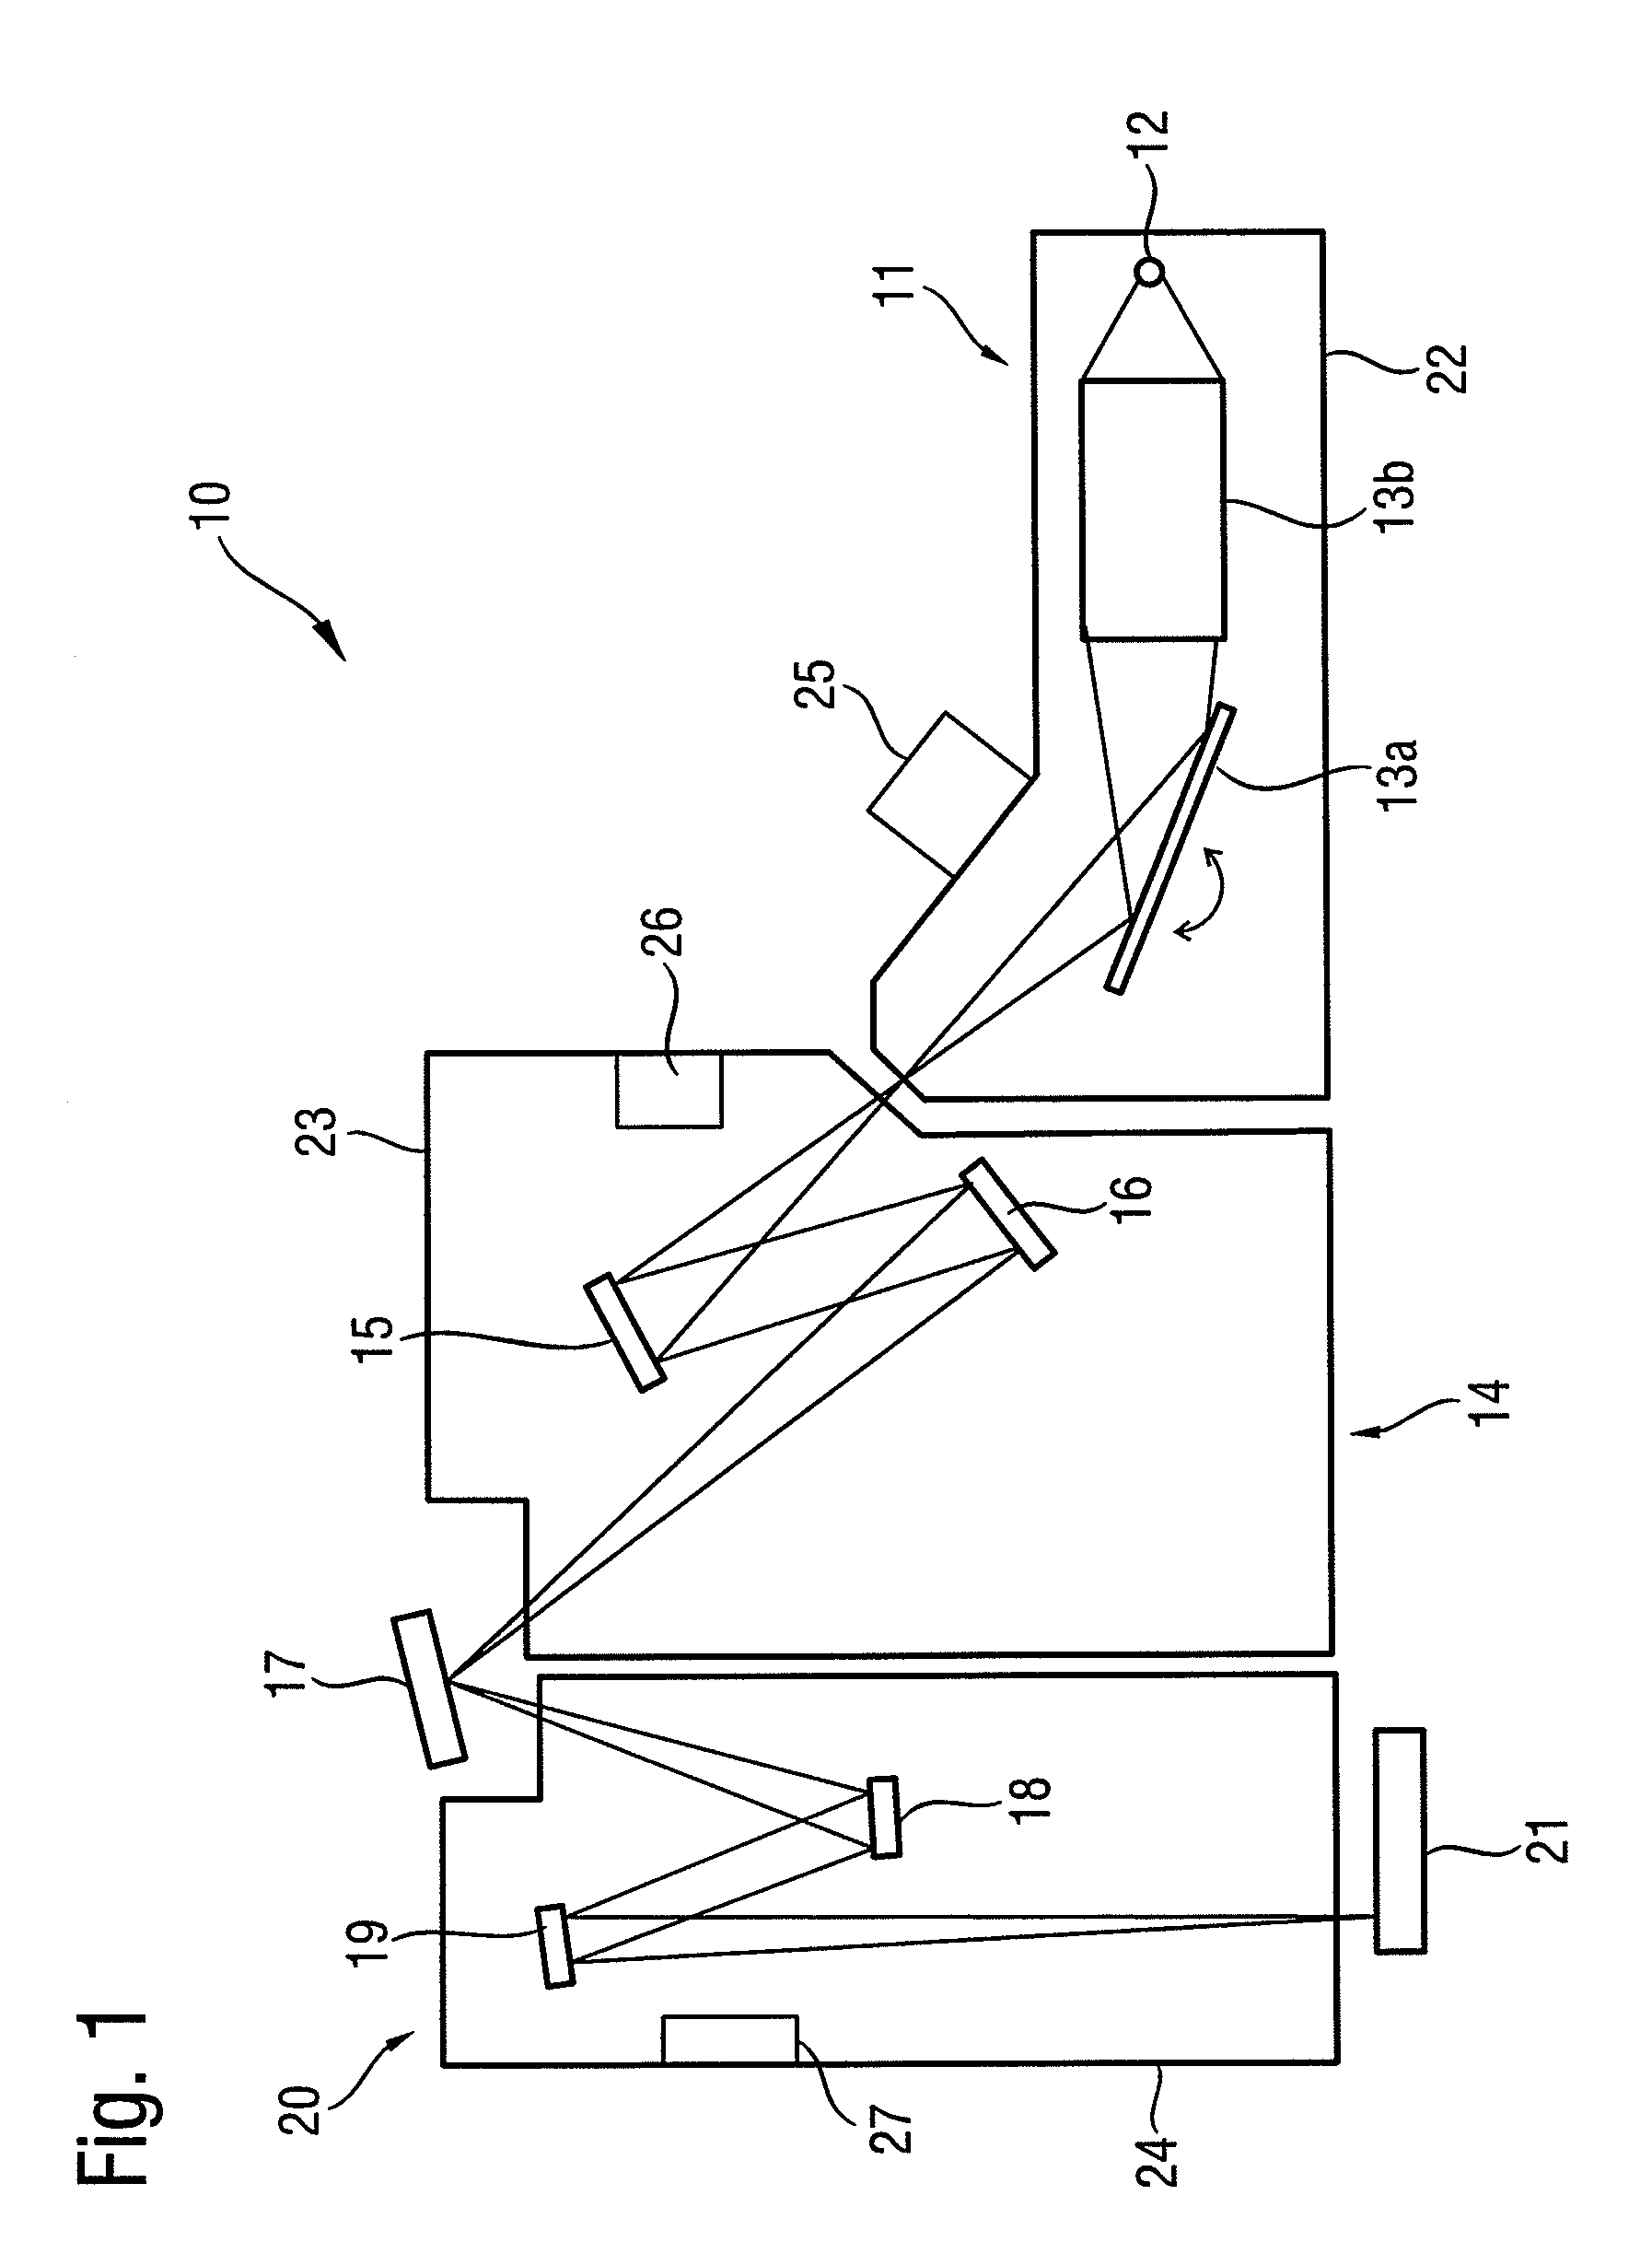 Cleaning module, EUV lithography device and method for the cleaning thereof